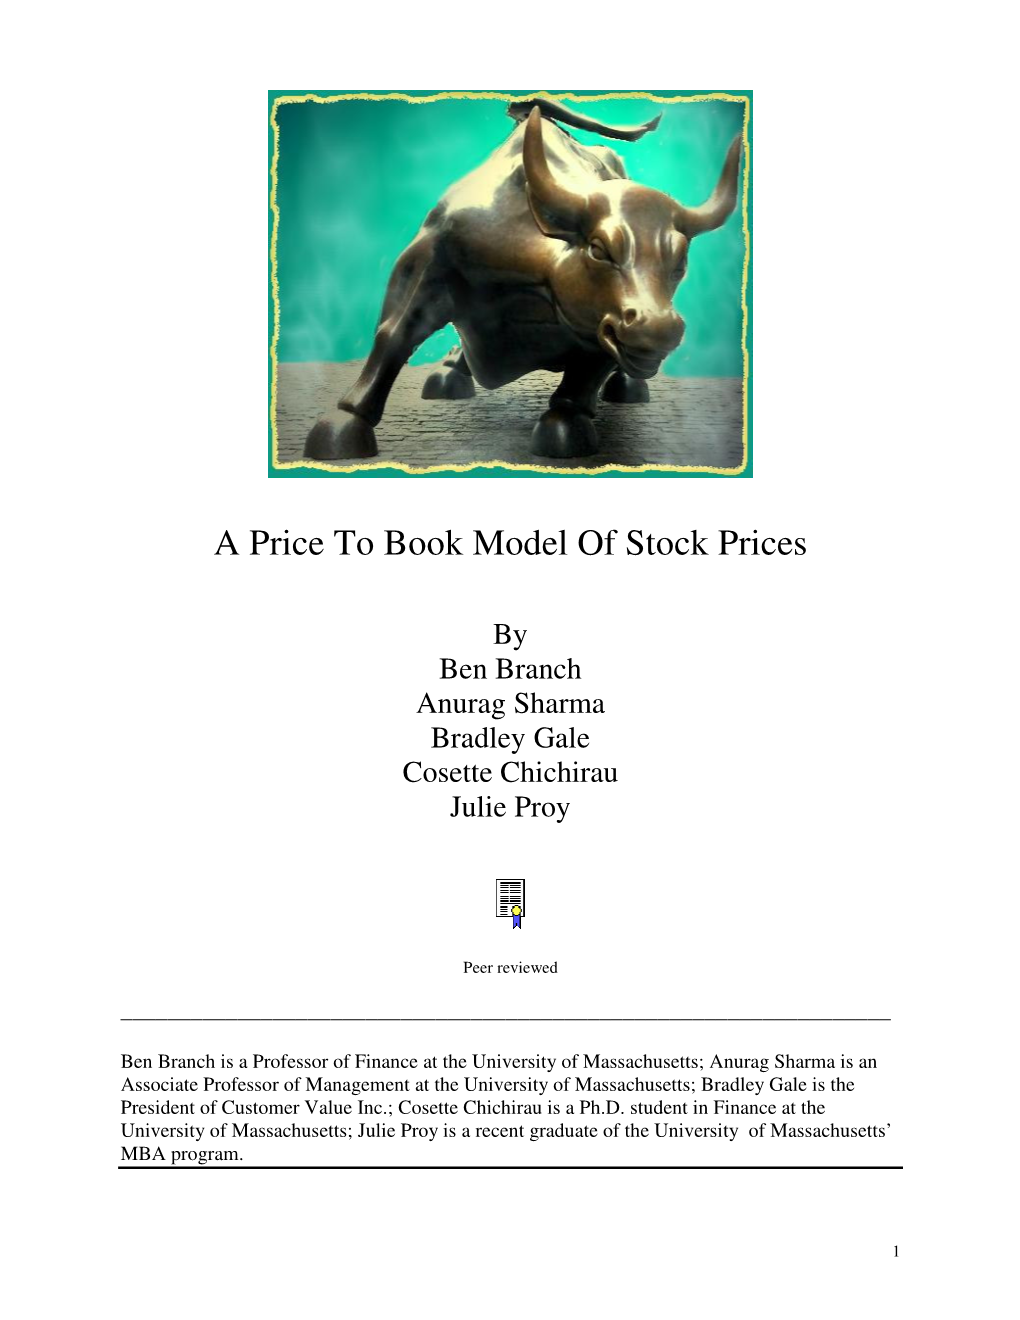 A Price to Book Model of Stock Prices